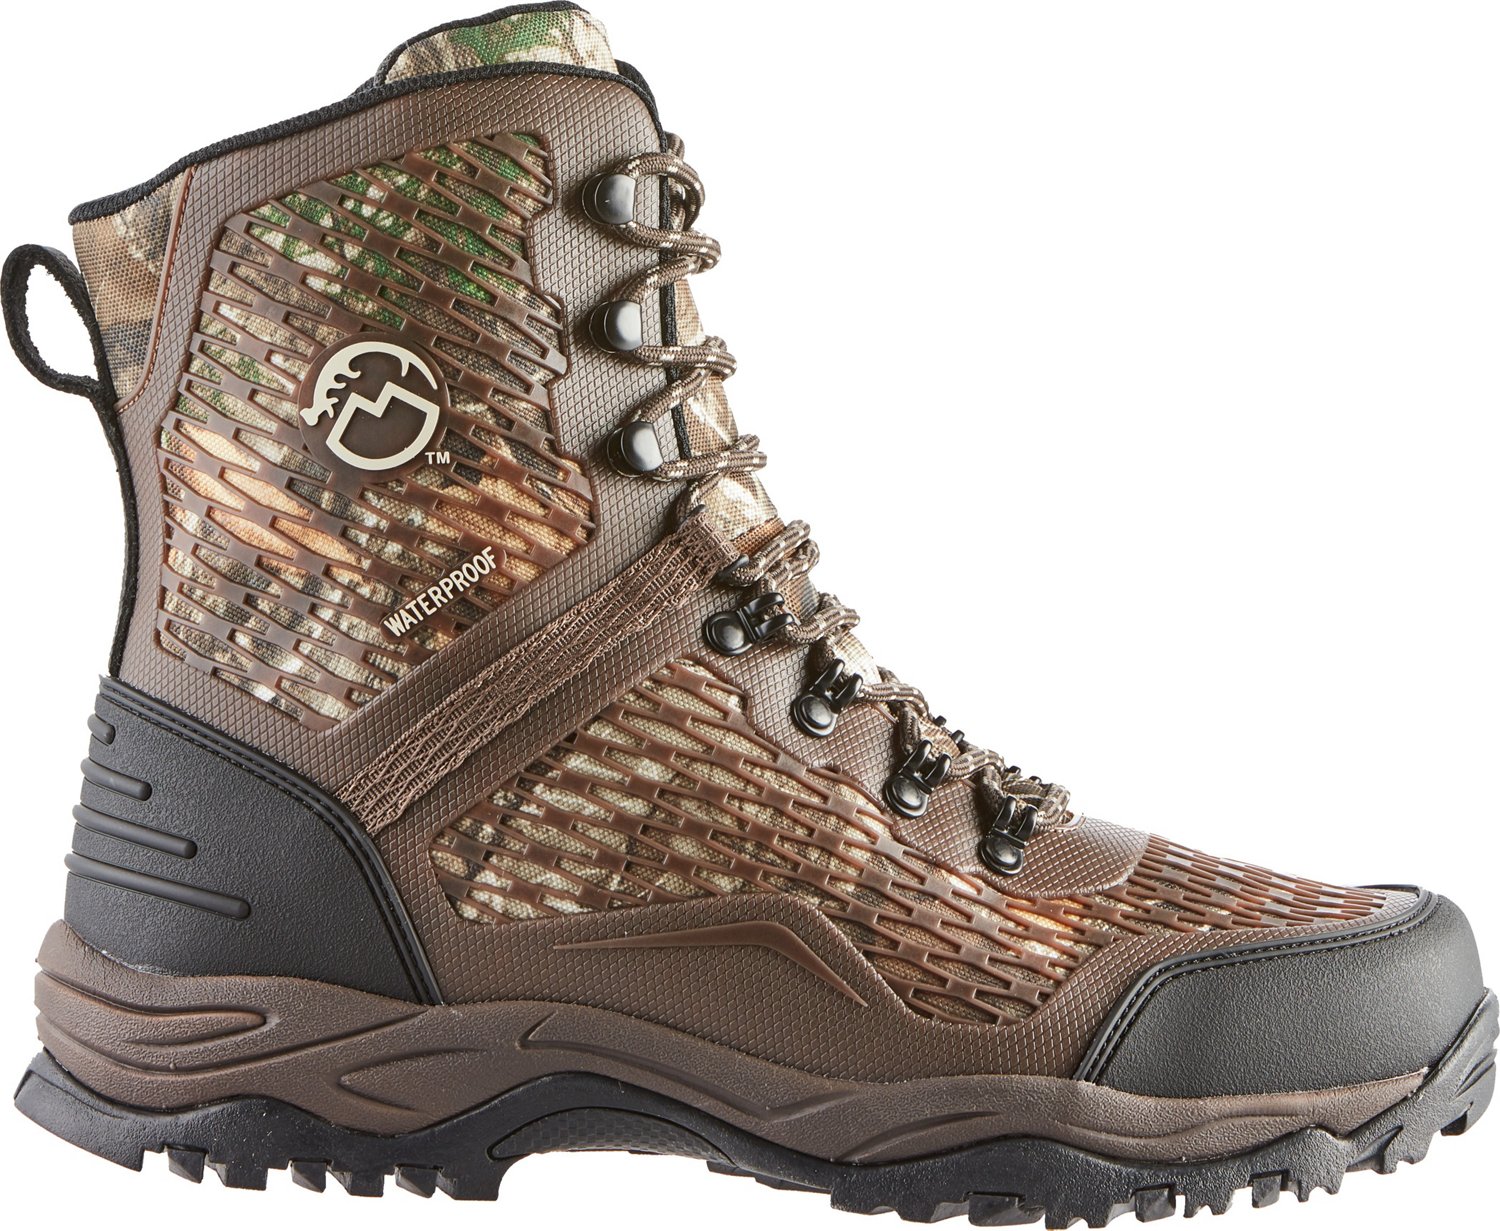 Magellan Outdoors Pro Men's Offroad Hunting Hiker Boots | Academy